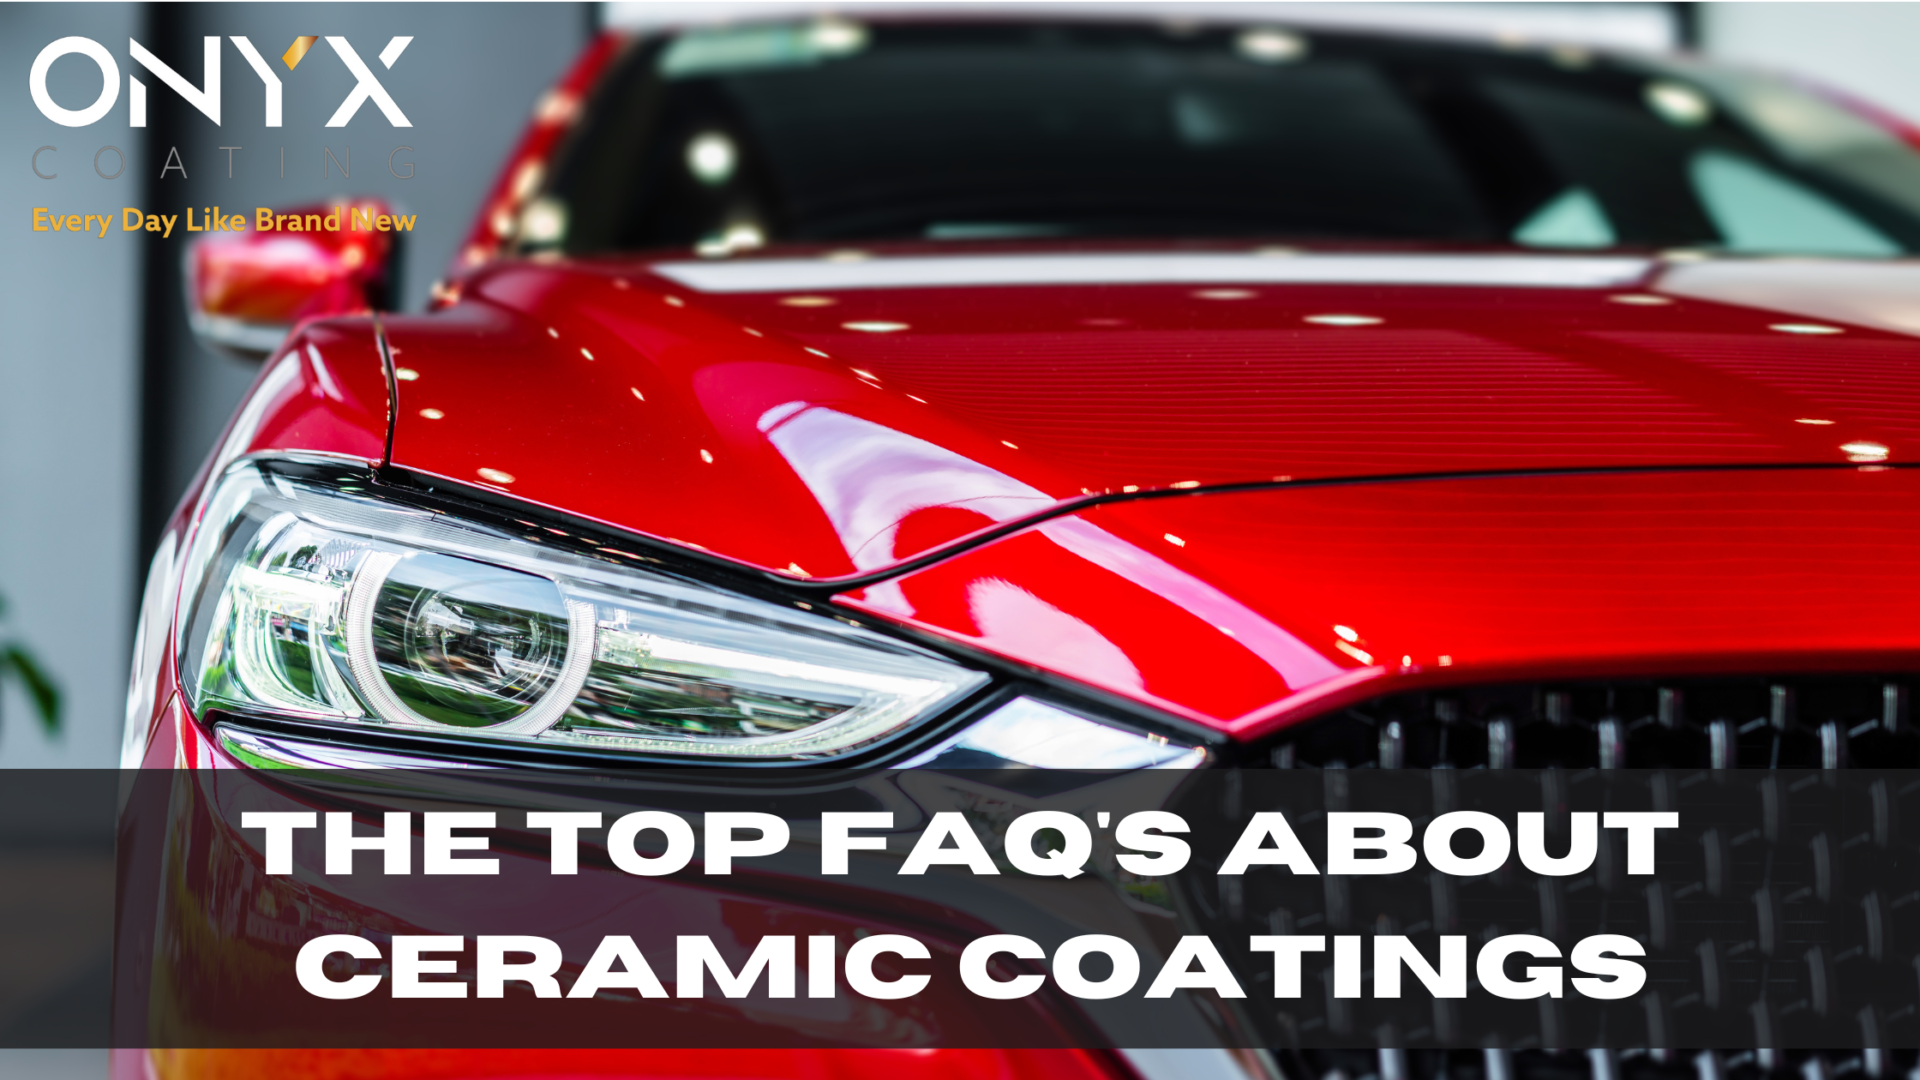 The top FAQ's about Ceramic Coatings (1)